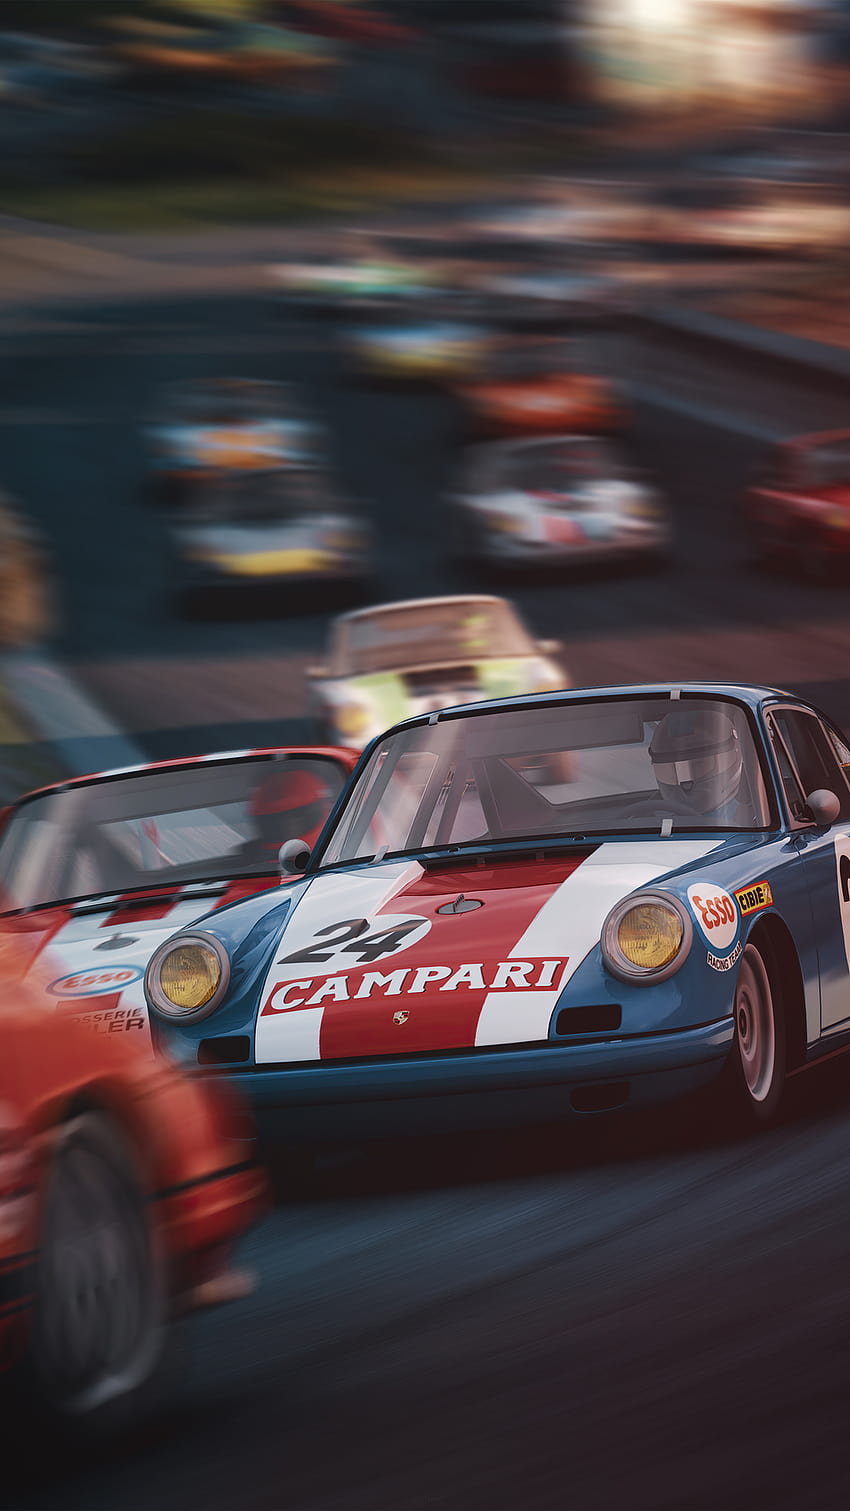 1080x1920 Porsche 912 R Cup On Spa Assetto Corsa Iphone 7,6s,6 Plus, Pixel xl ,One Plus 3,3t,5 , Backgrounds, and HD phone wallpaper